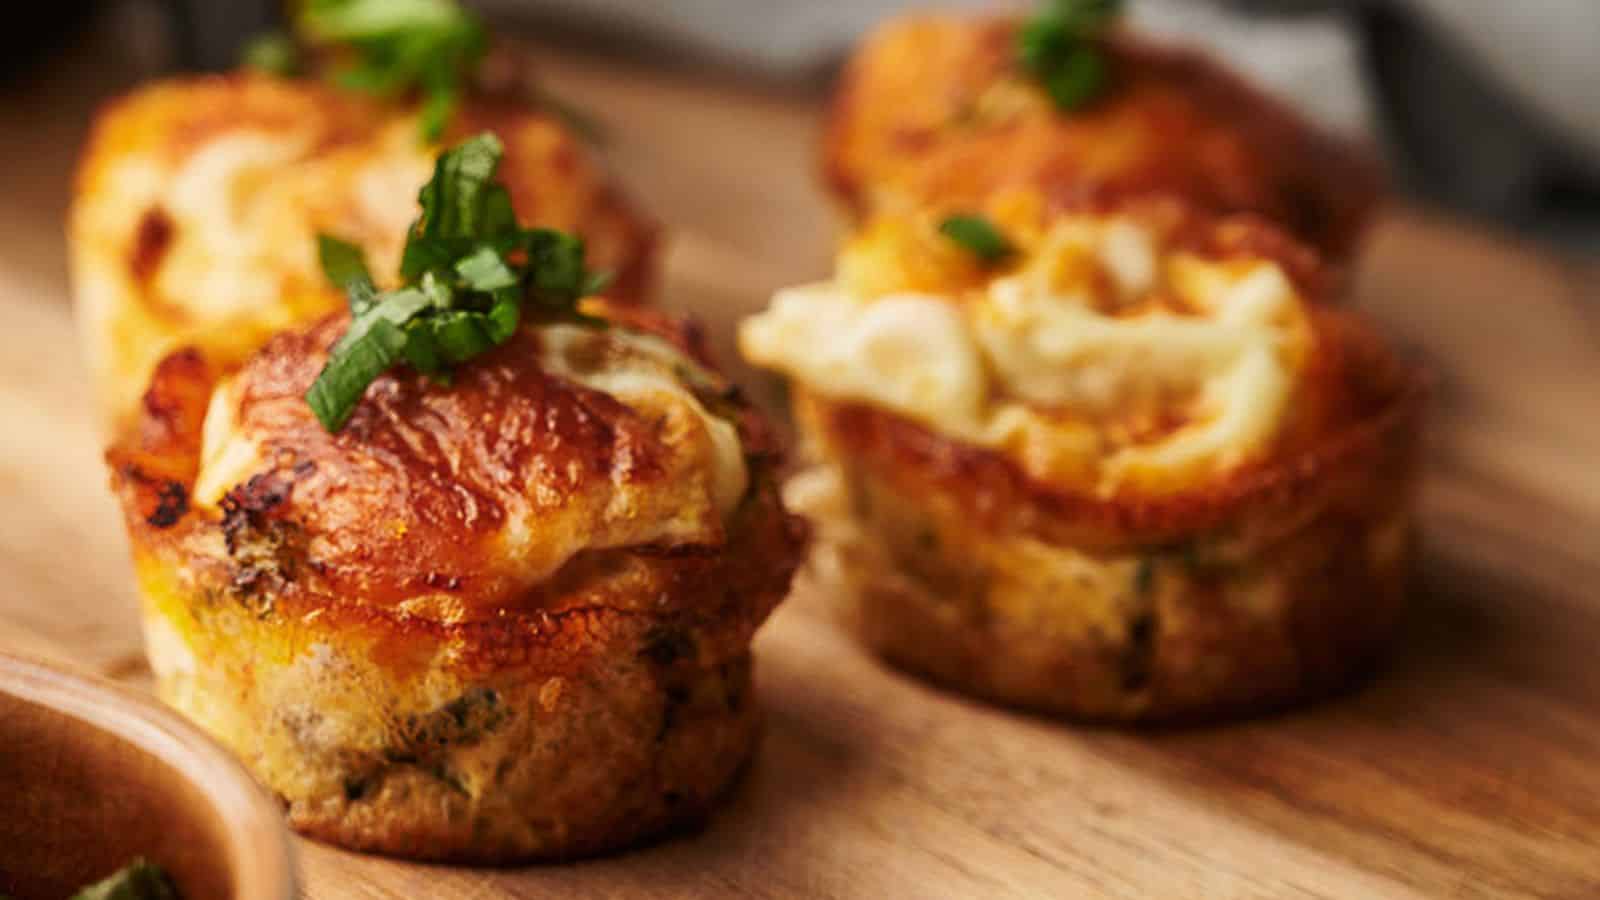 <p>Breathe a new life into your Sunday breakfast with these incredible egg bites. They are easy to make and packed with deliciousness – just the stress-free weekend breakfast you need to wrap up your relaxed weekend in a tasty style.<br><strong>Get the Recipe: </strong><a href="https://www.splashoftaste.com/egg-bites-recipe/?utm_source=msn&utm_medium=page&utm_campaign=msn">Egg Bites</a></p>